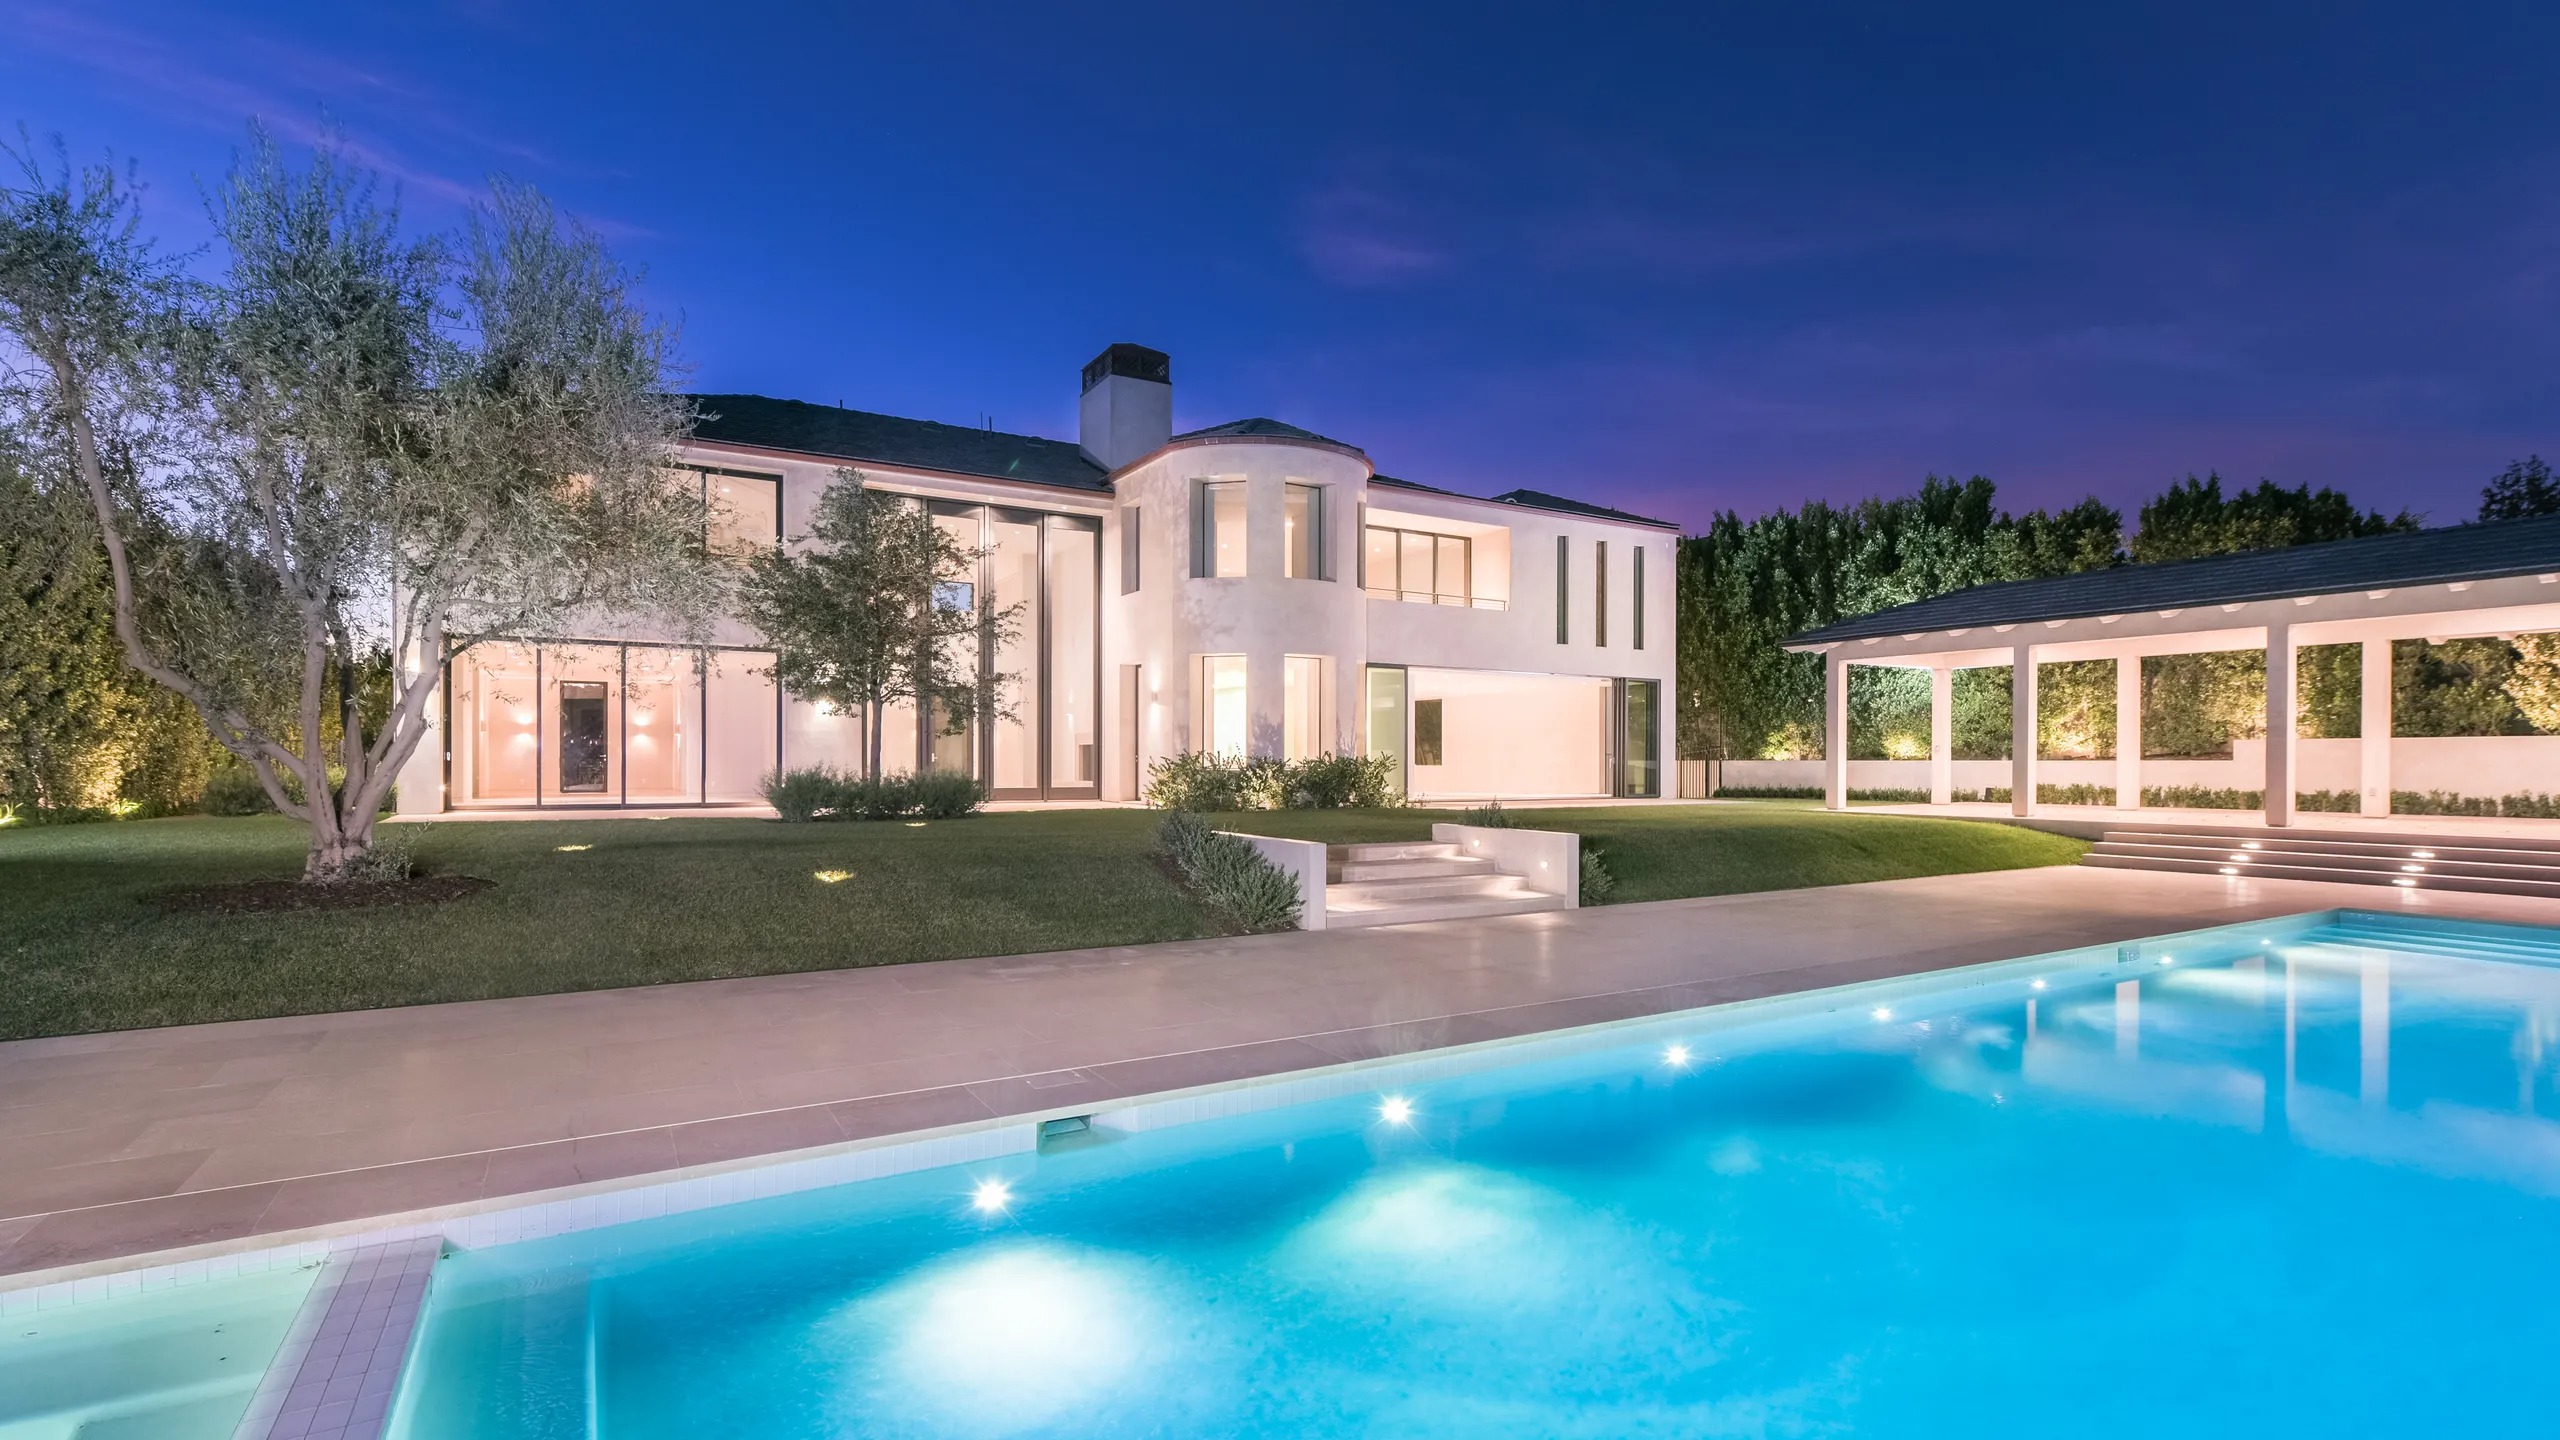 Kim Kardashian surprised when she bought a $60M villa located between ...